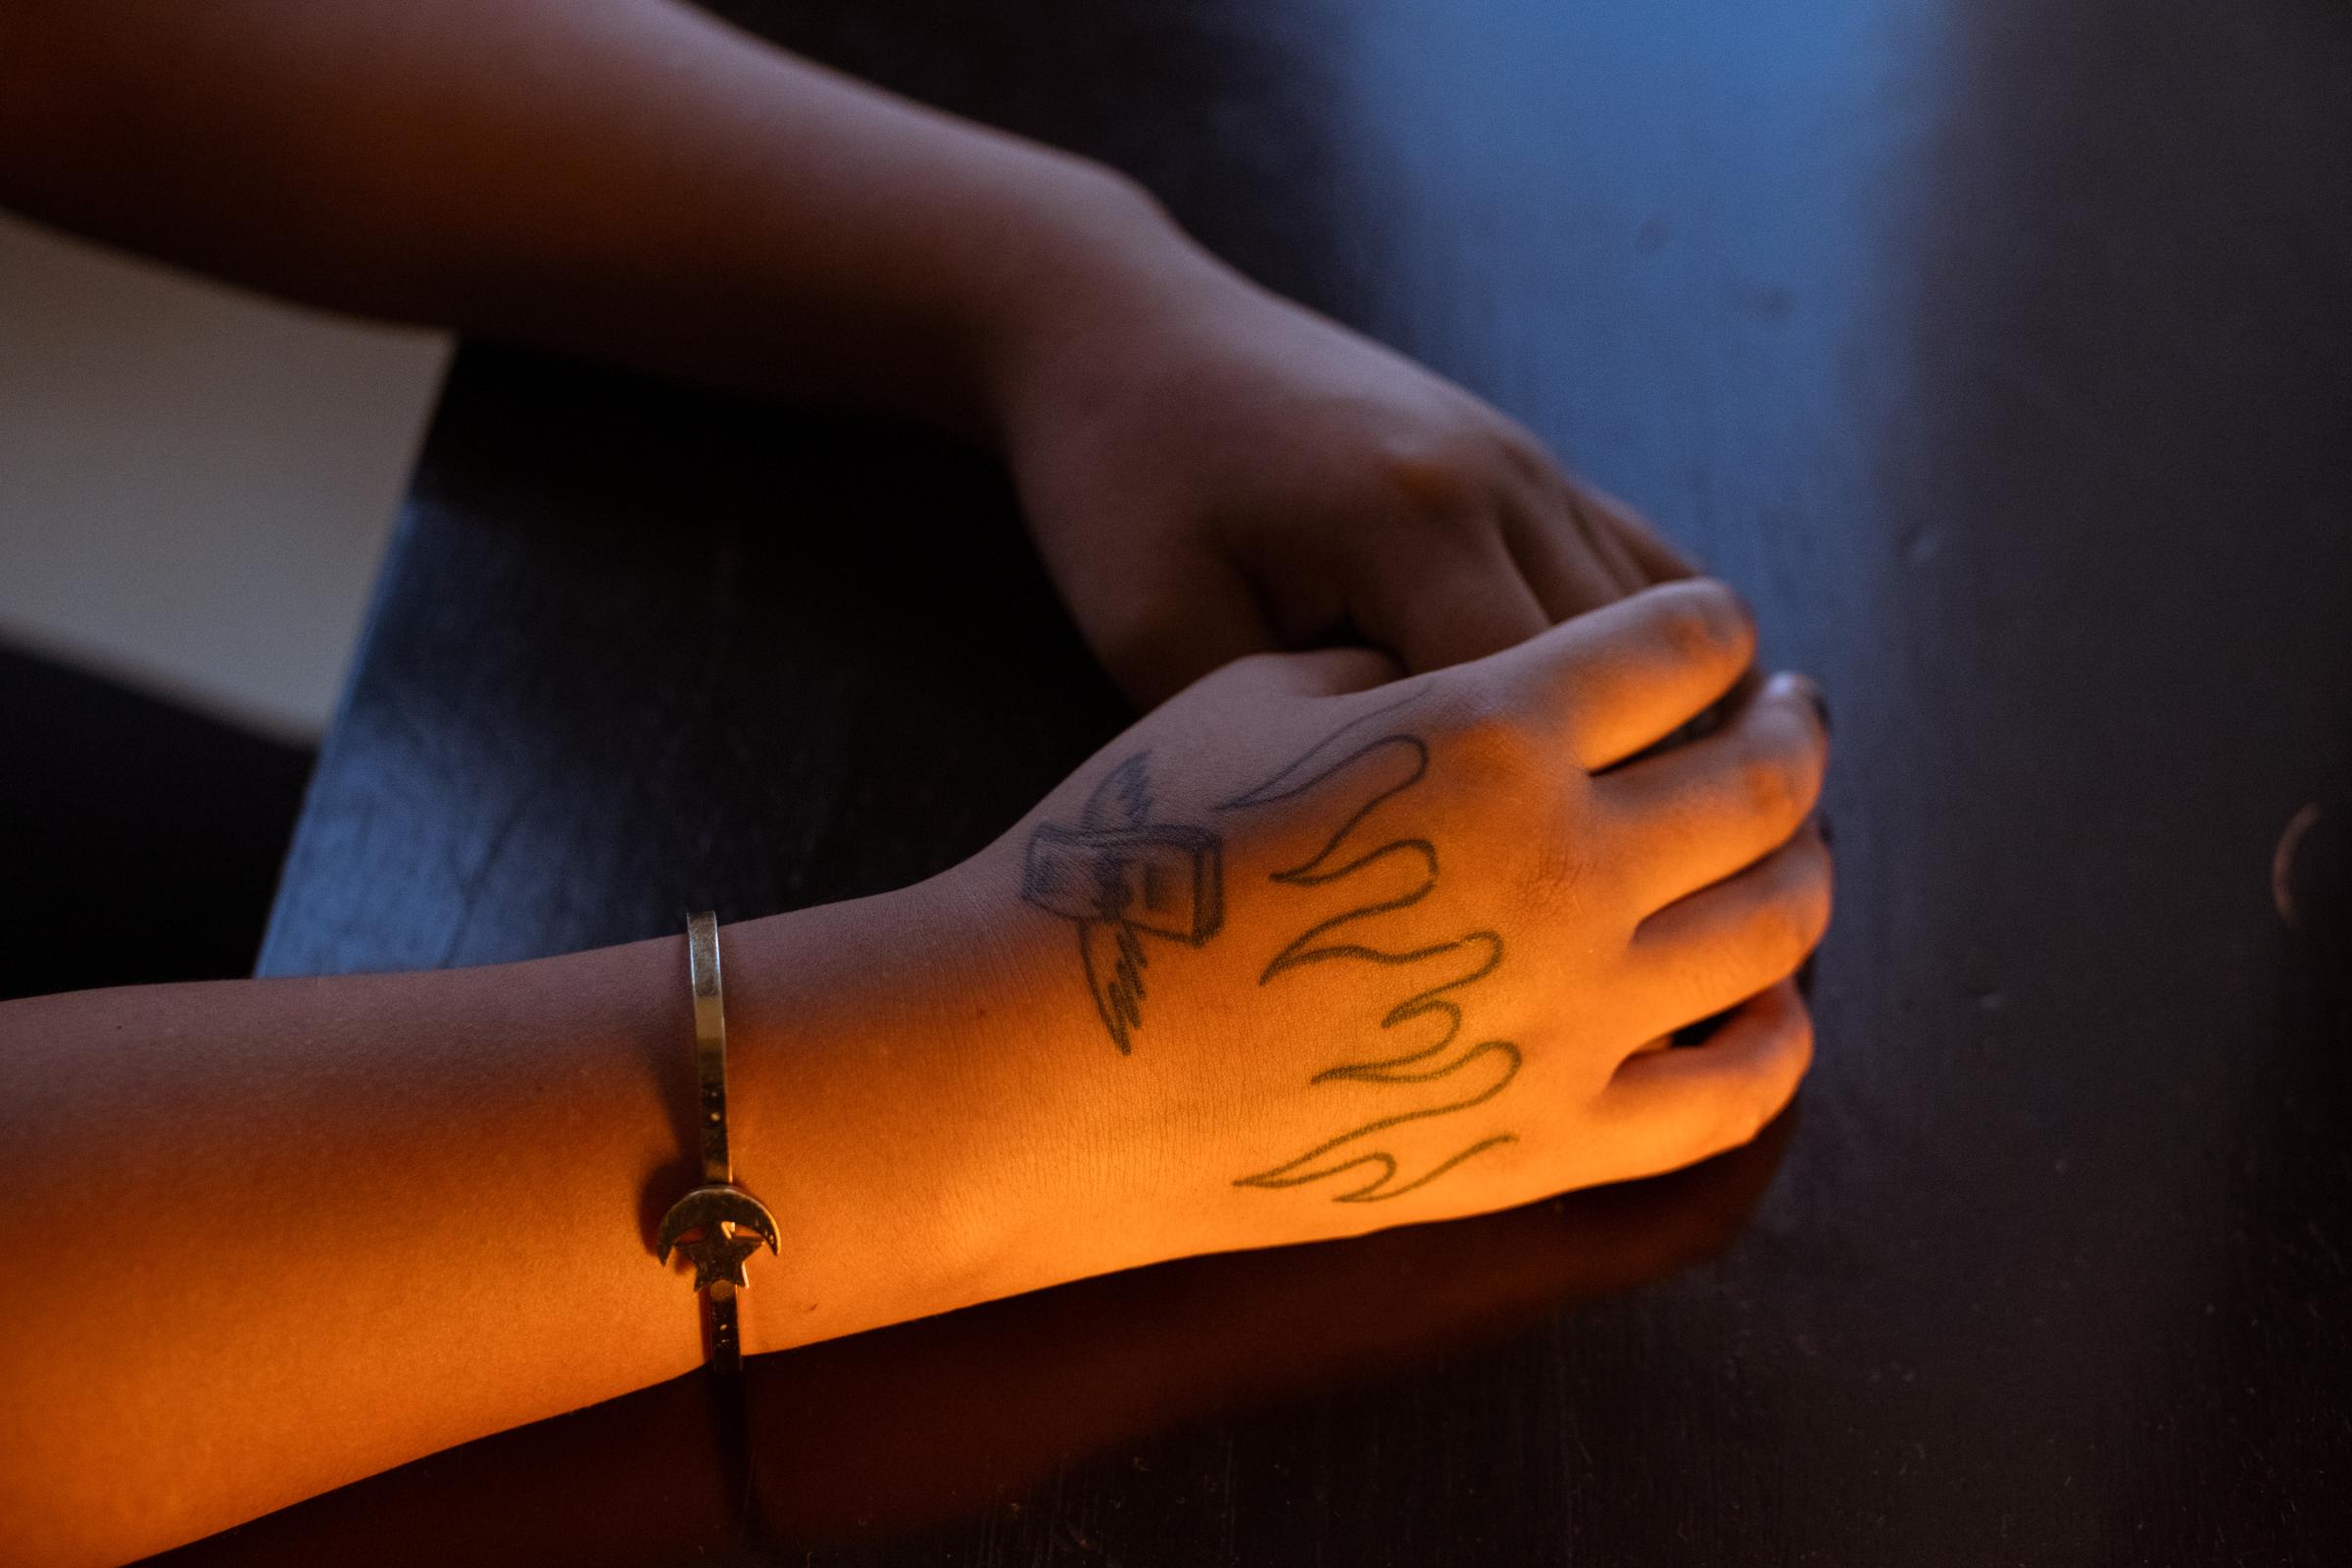 Illegal Gold Mining in La Pampa - Detail of the tattoos on Celine's hand, a victim of...